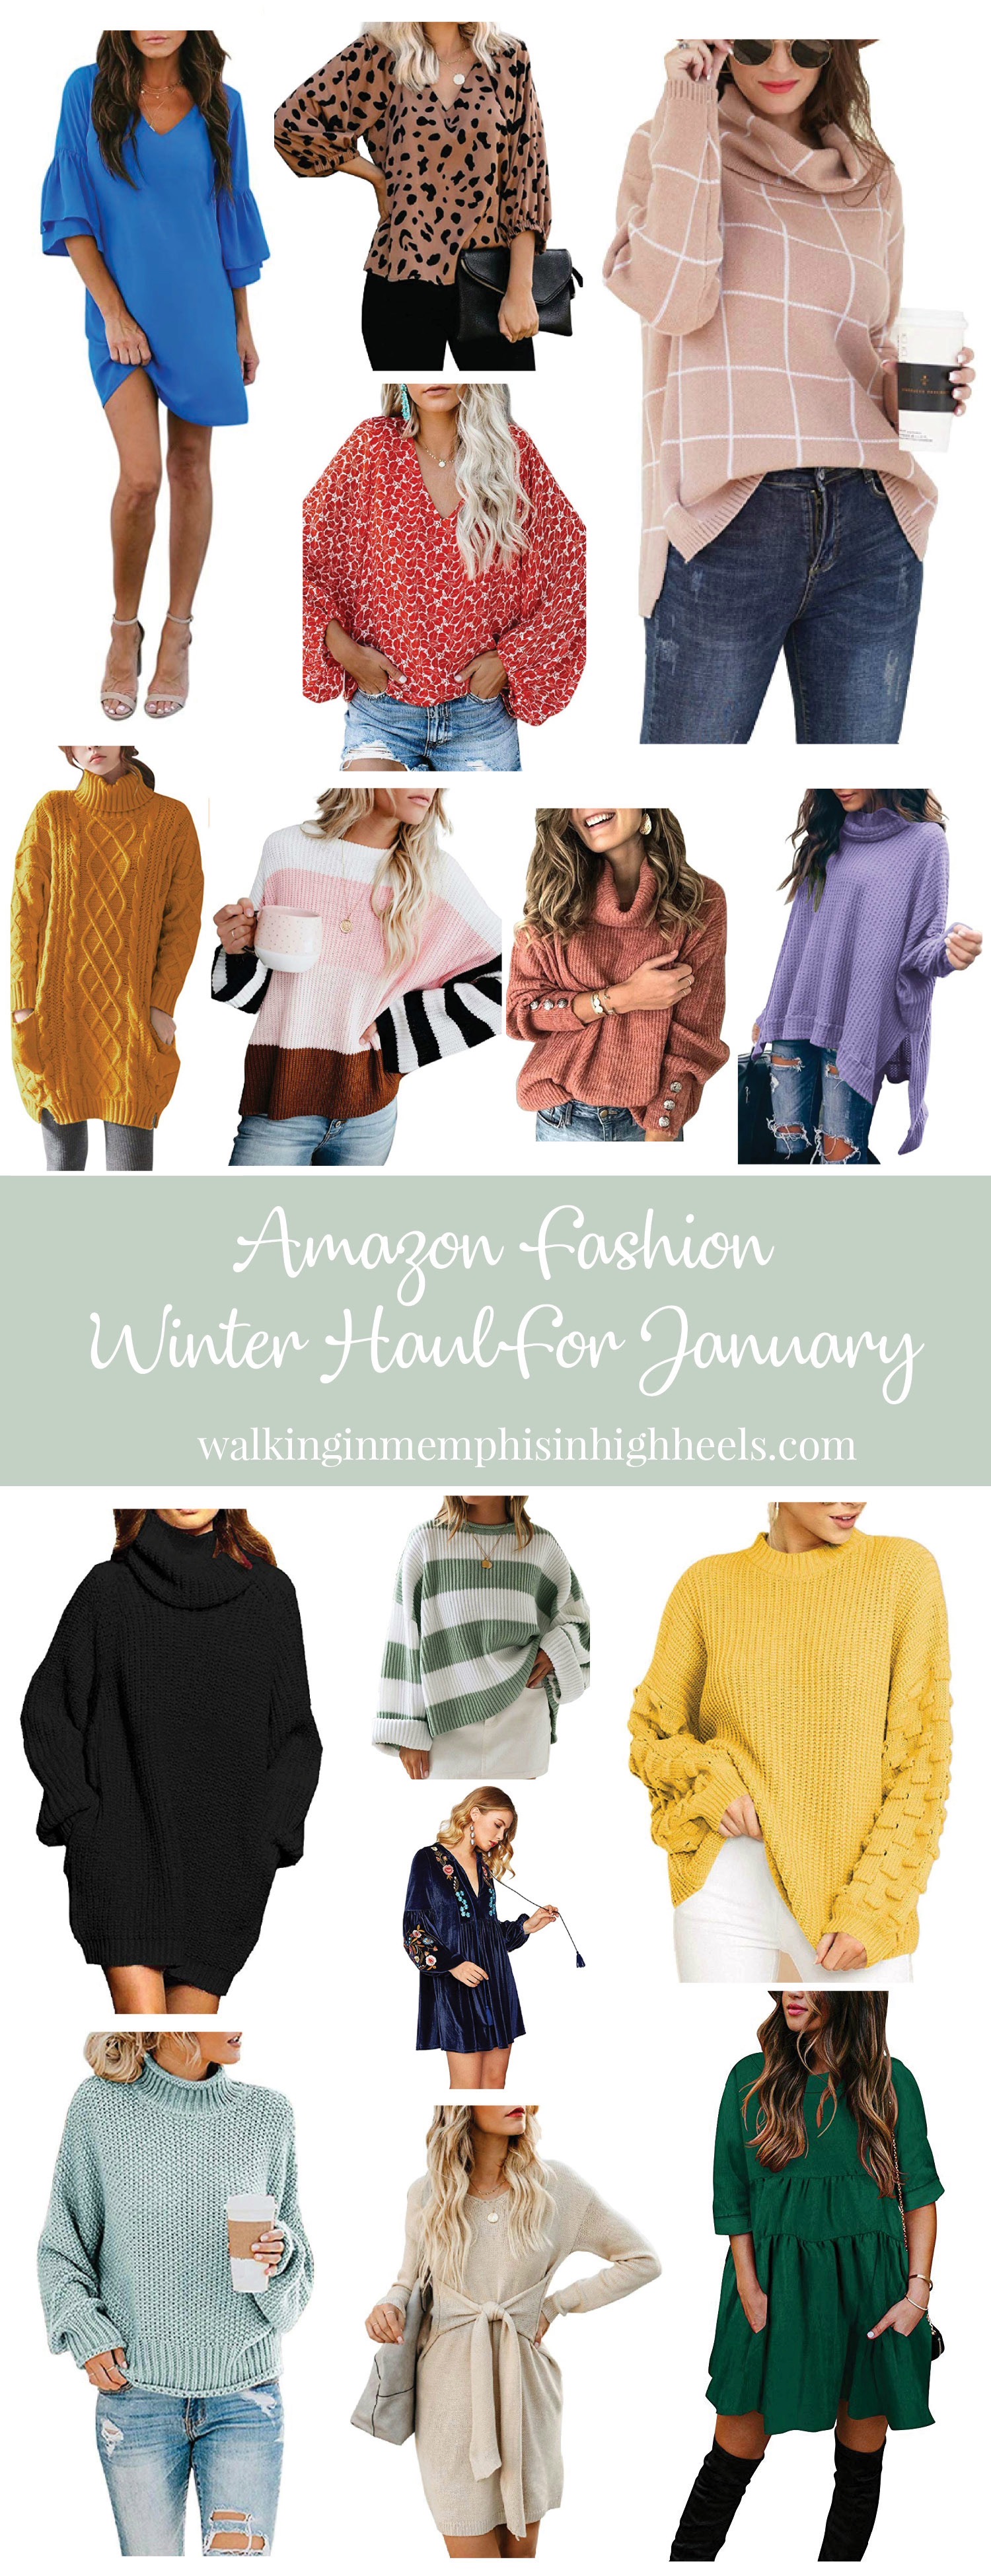 Amazon winter fashion haul featured by top Memphis fashion blog, Walking in Memphis in High Heels.